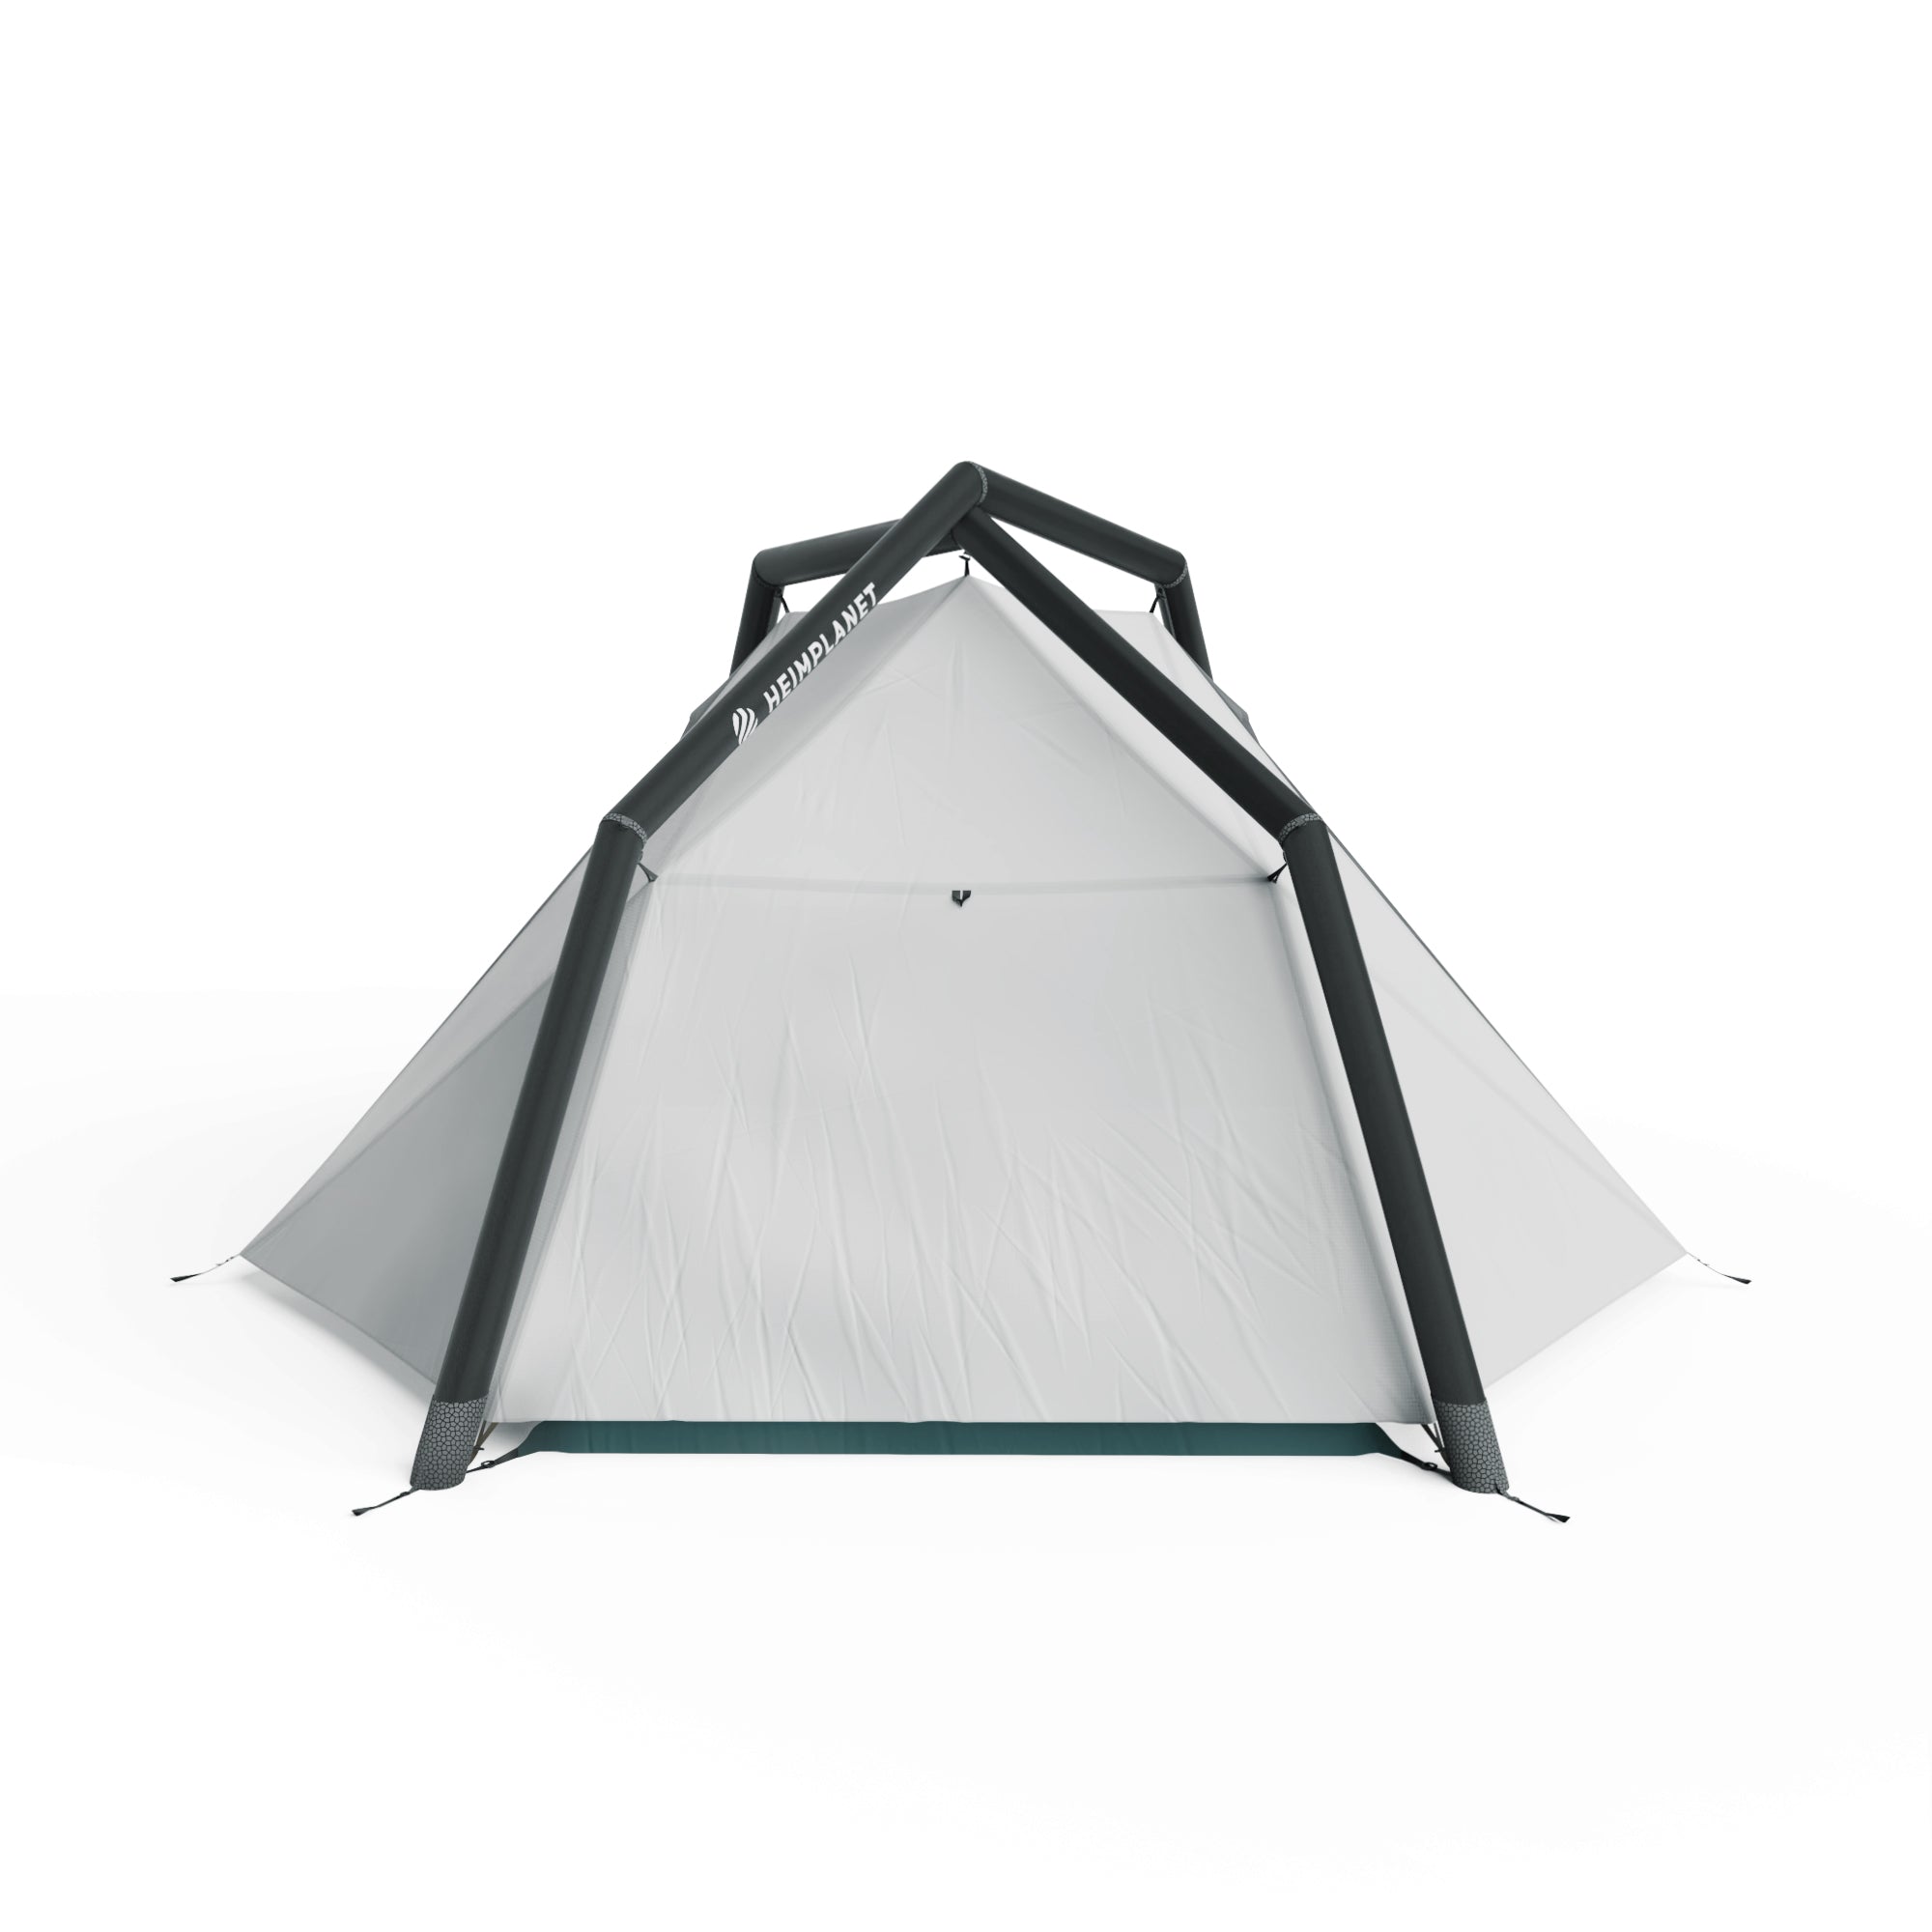 Fistral - Heimplanet Tents - Storming Gravity